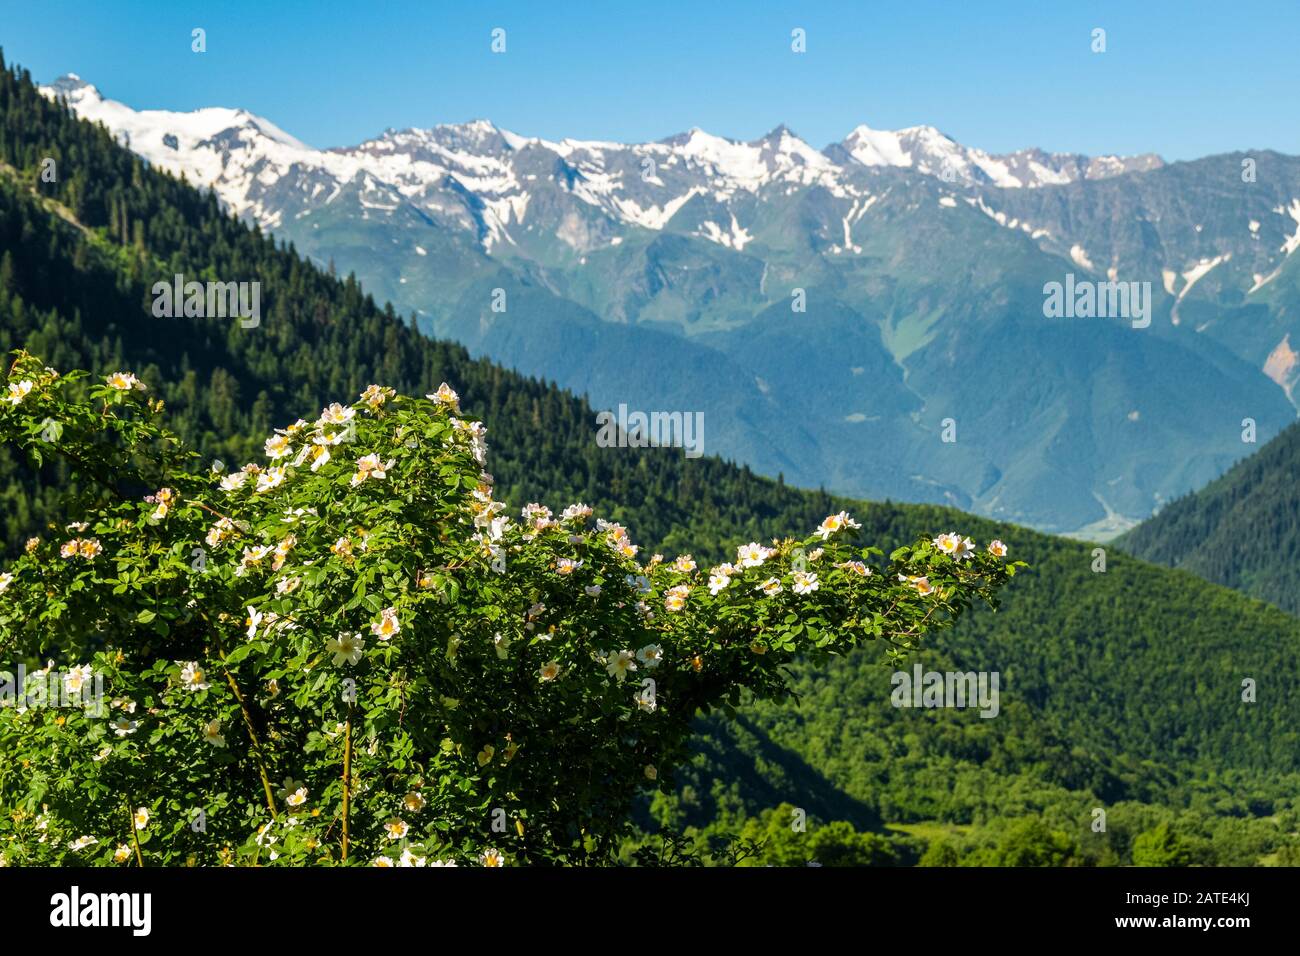 Blooming wild rose shrub with snow-capped peaks of Caucasus Mountains in the background on a summer day. Svaneti, Georgia. Stock Photo